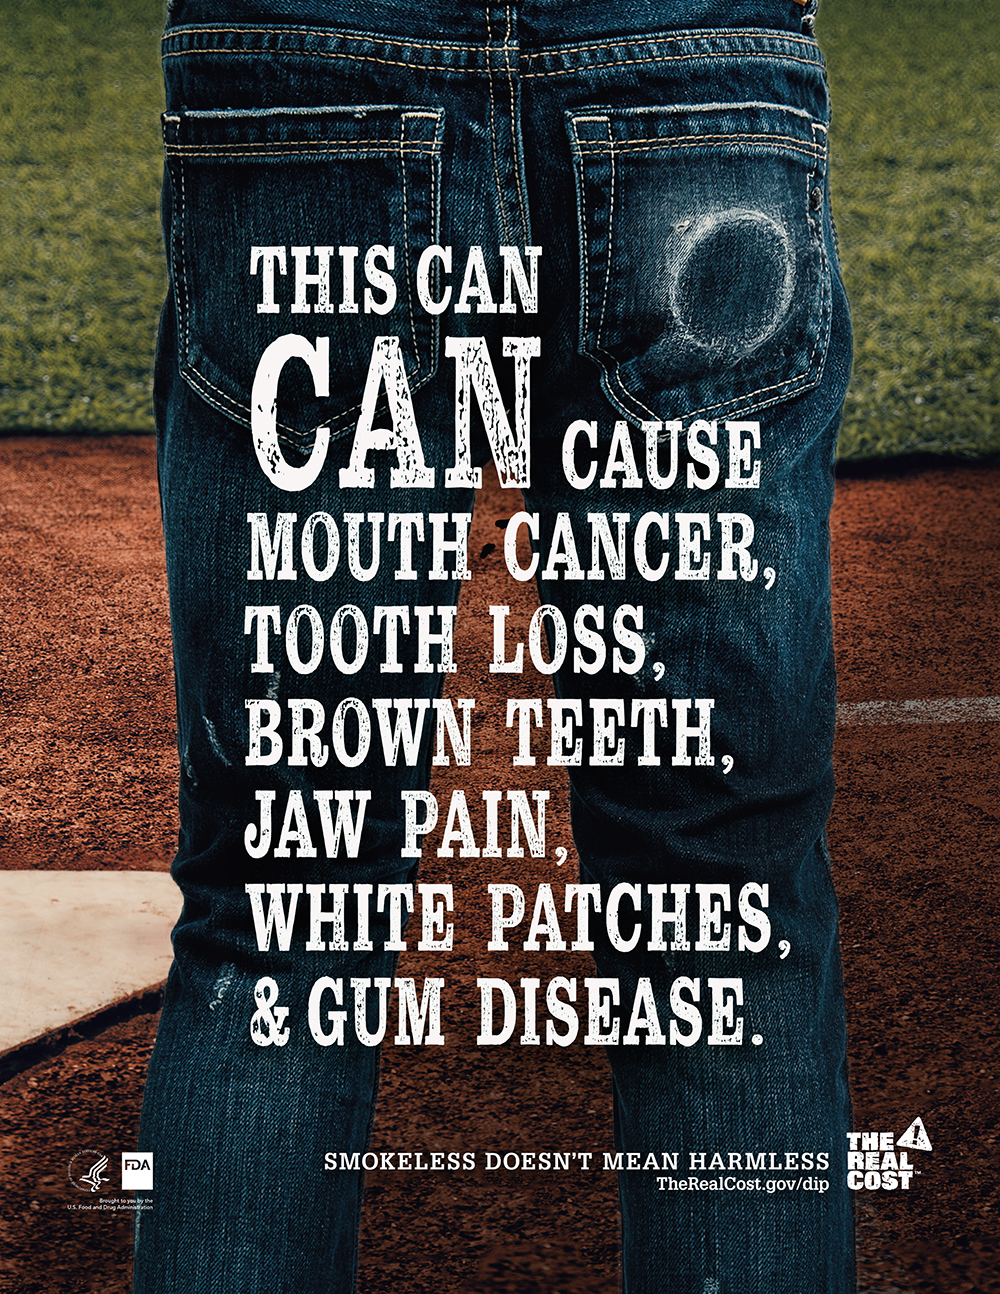 Smokeless tobacco poster - This can can cause mouth cancer, tooth loss, brown teeth, jaw pain, white patches and gum disease.